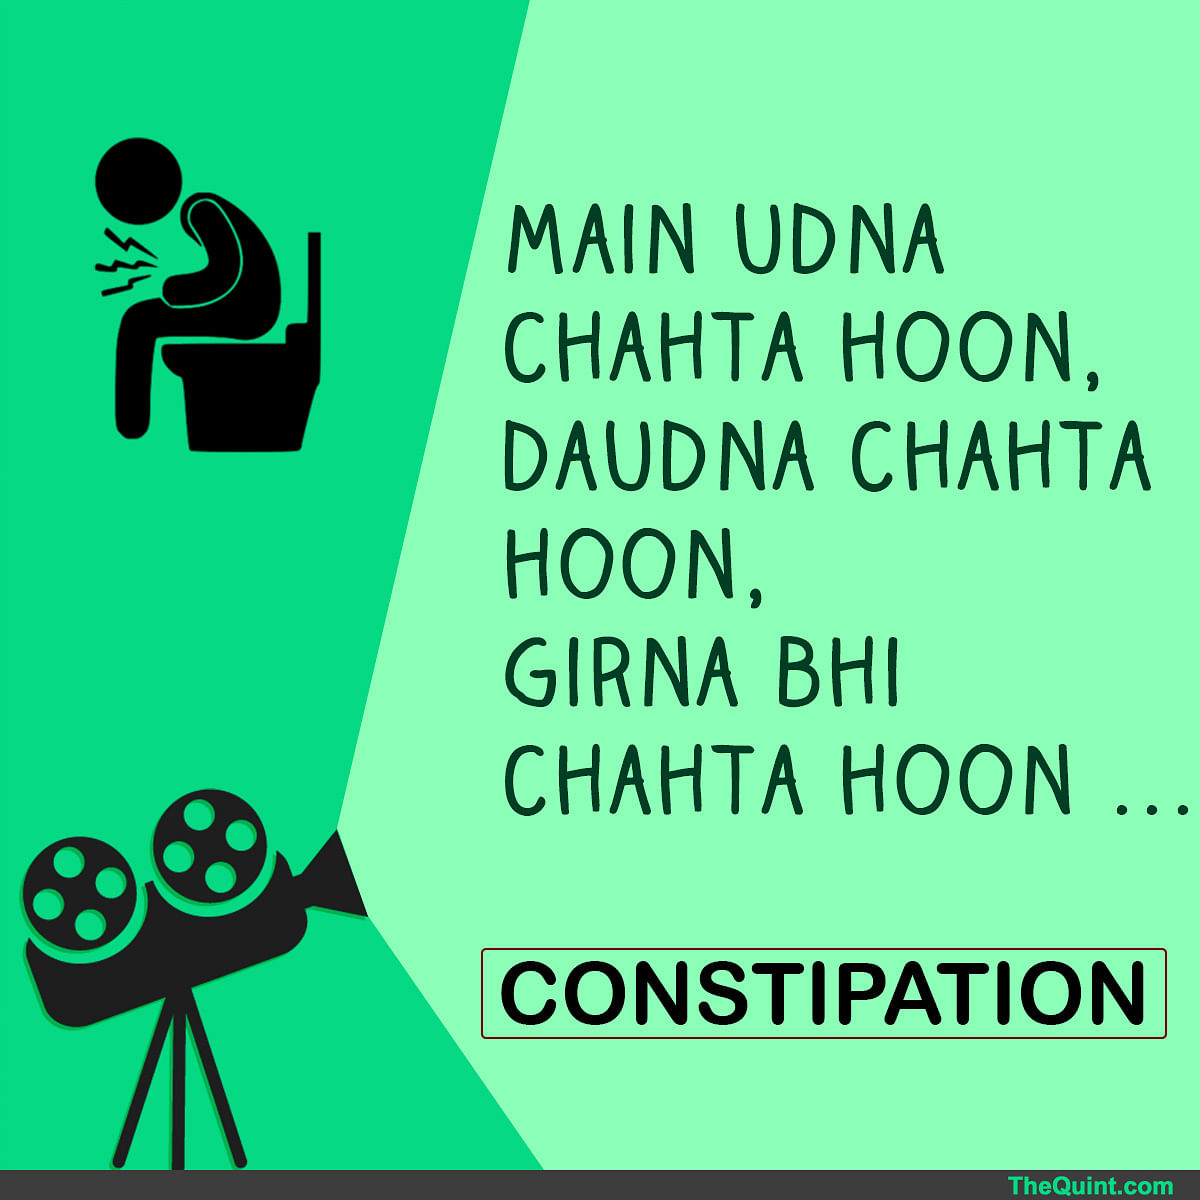 Bollywood dialogues that best describe your health conditions. 